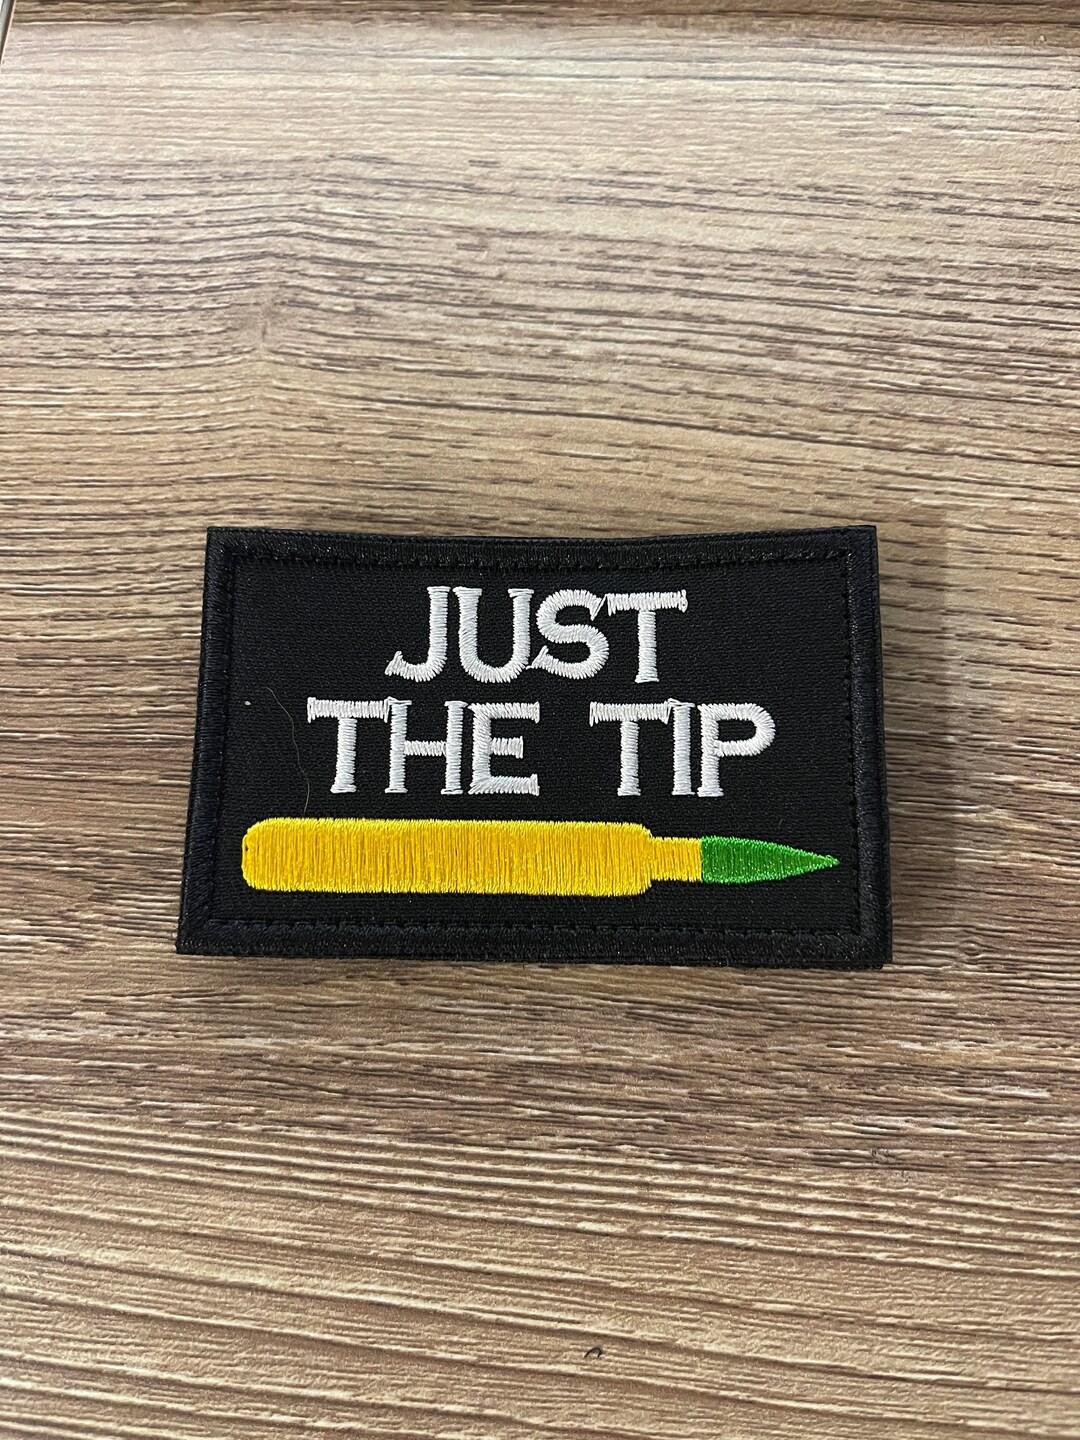 Tactical Embroidered Just the Tip Patch Iron-on Patch - Etsy